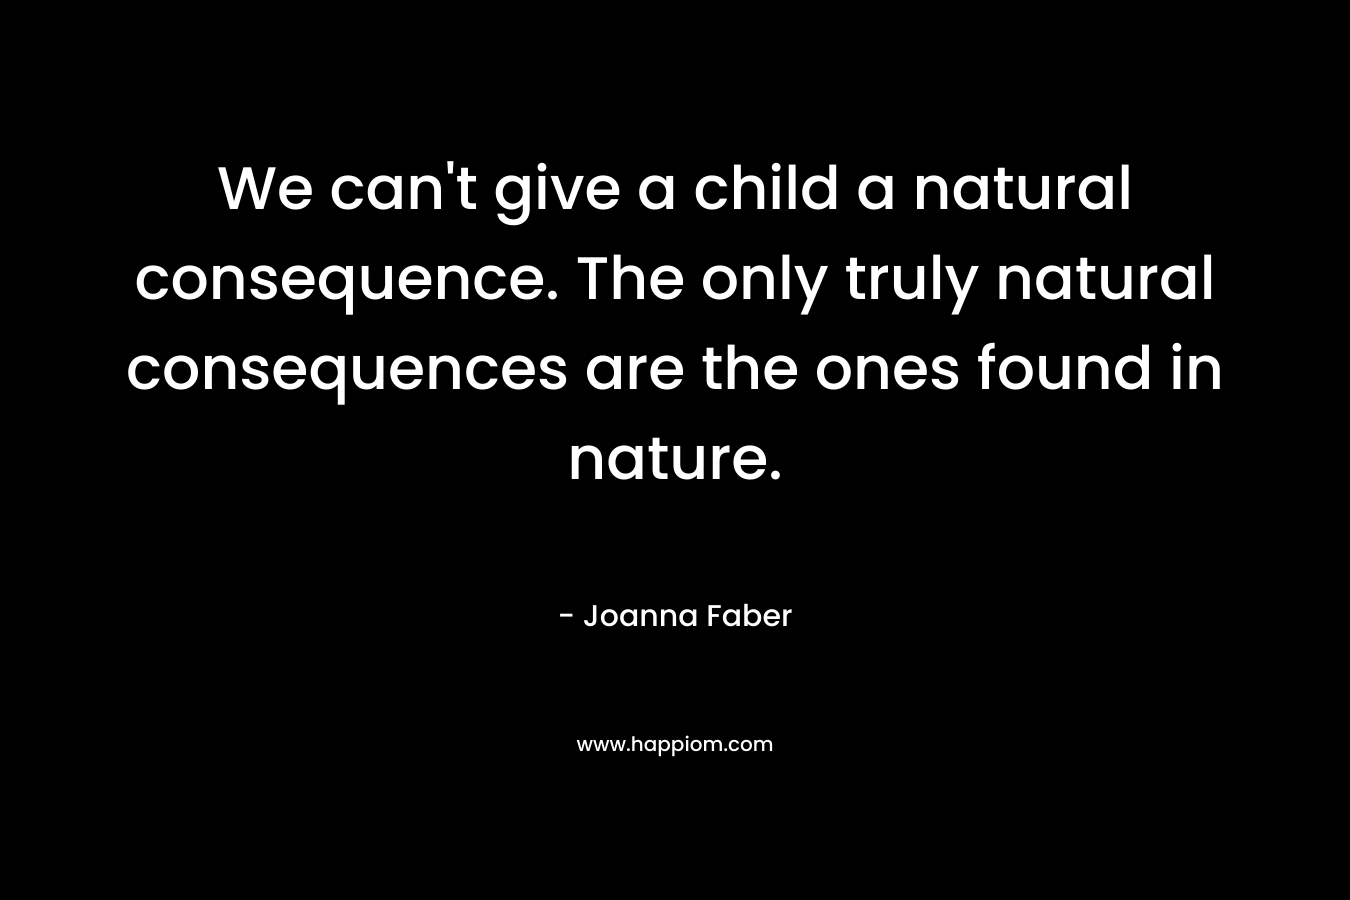 We can't give a child a natural consequence. The only truly natural consequences are the ones found in nature.